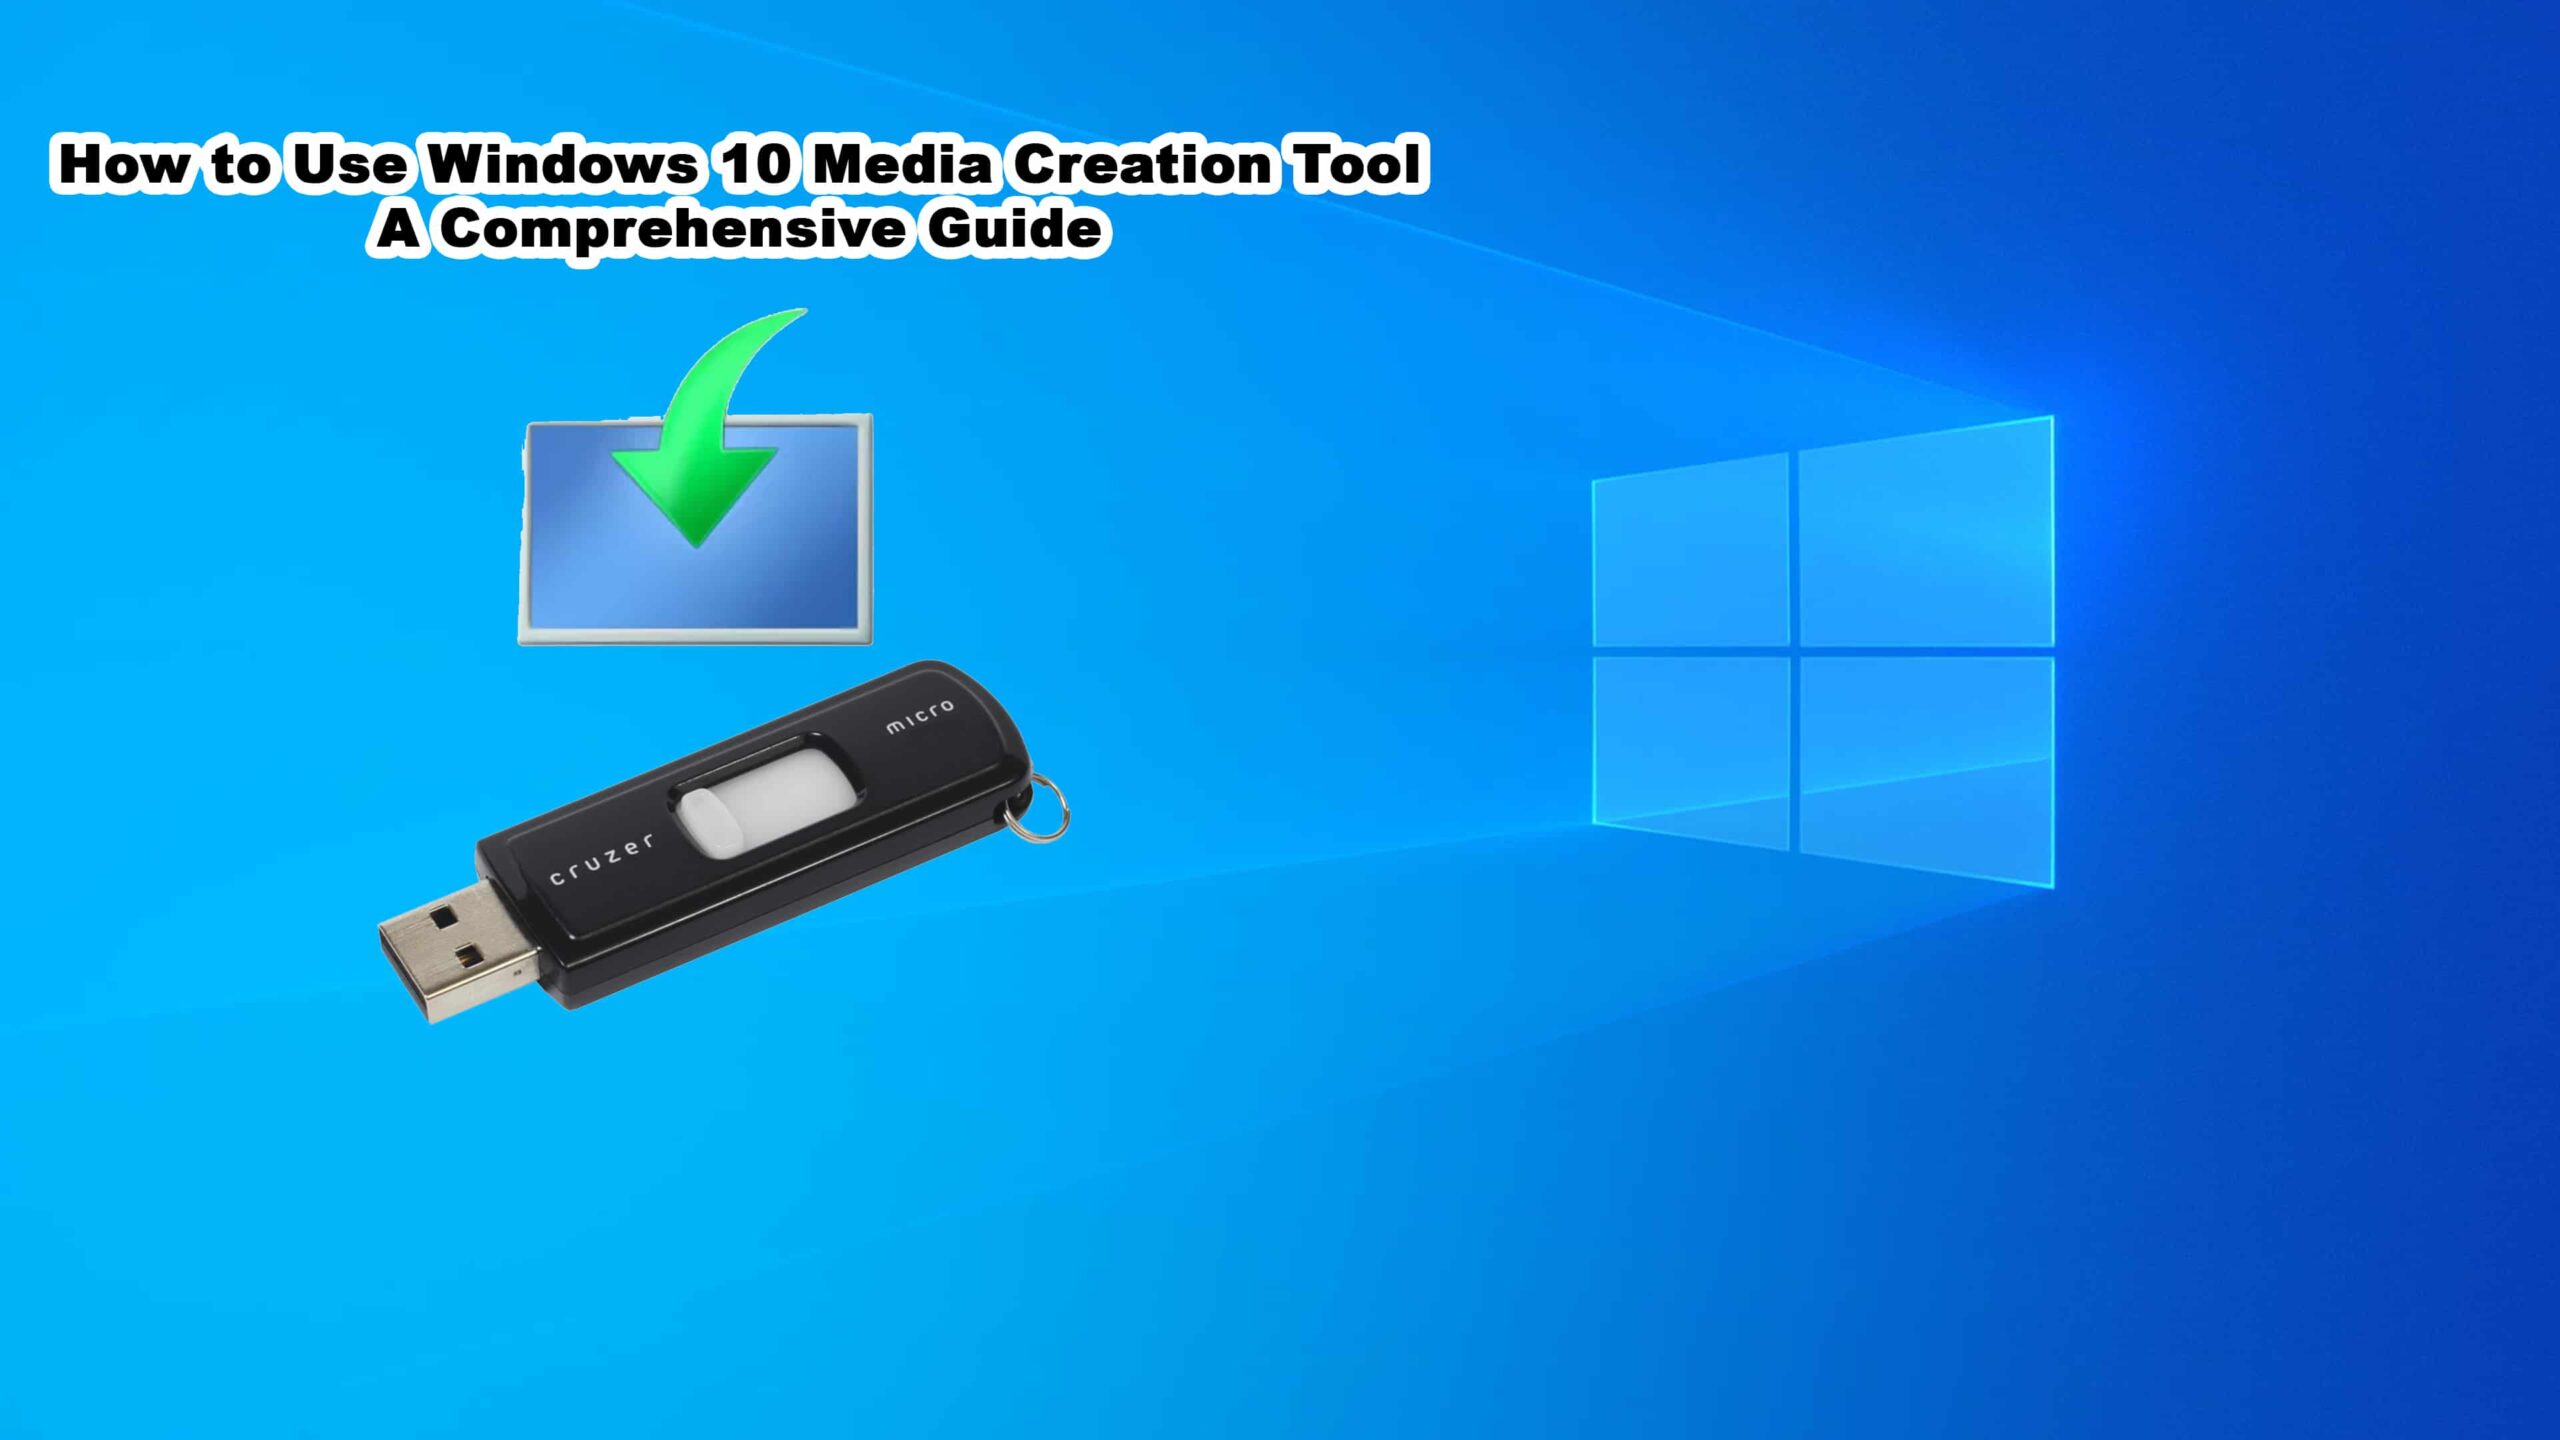 How to Use Windows 10 Media Creation Tool: A Comprehensive Guide